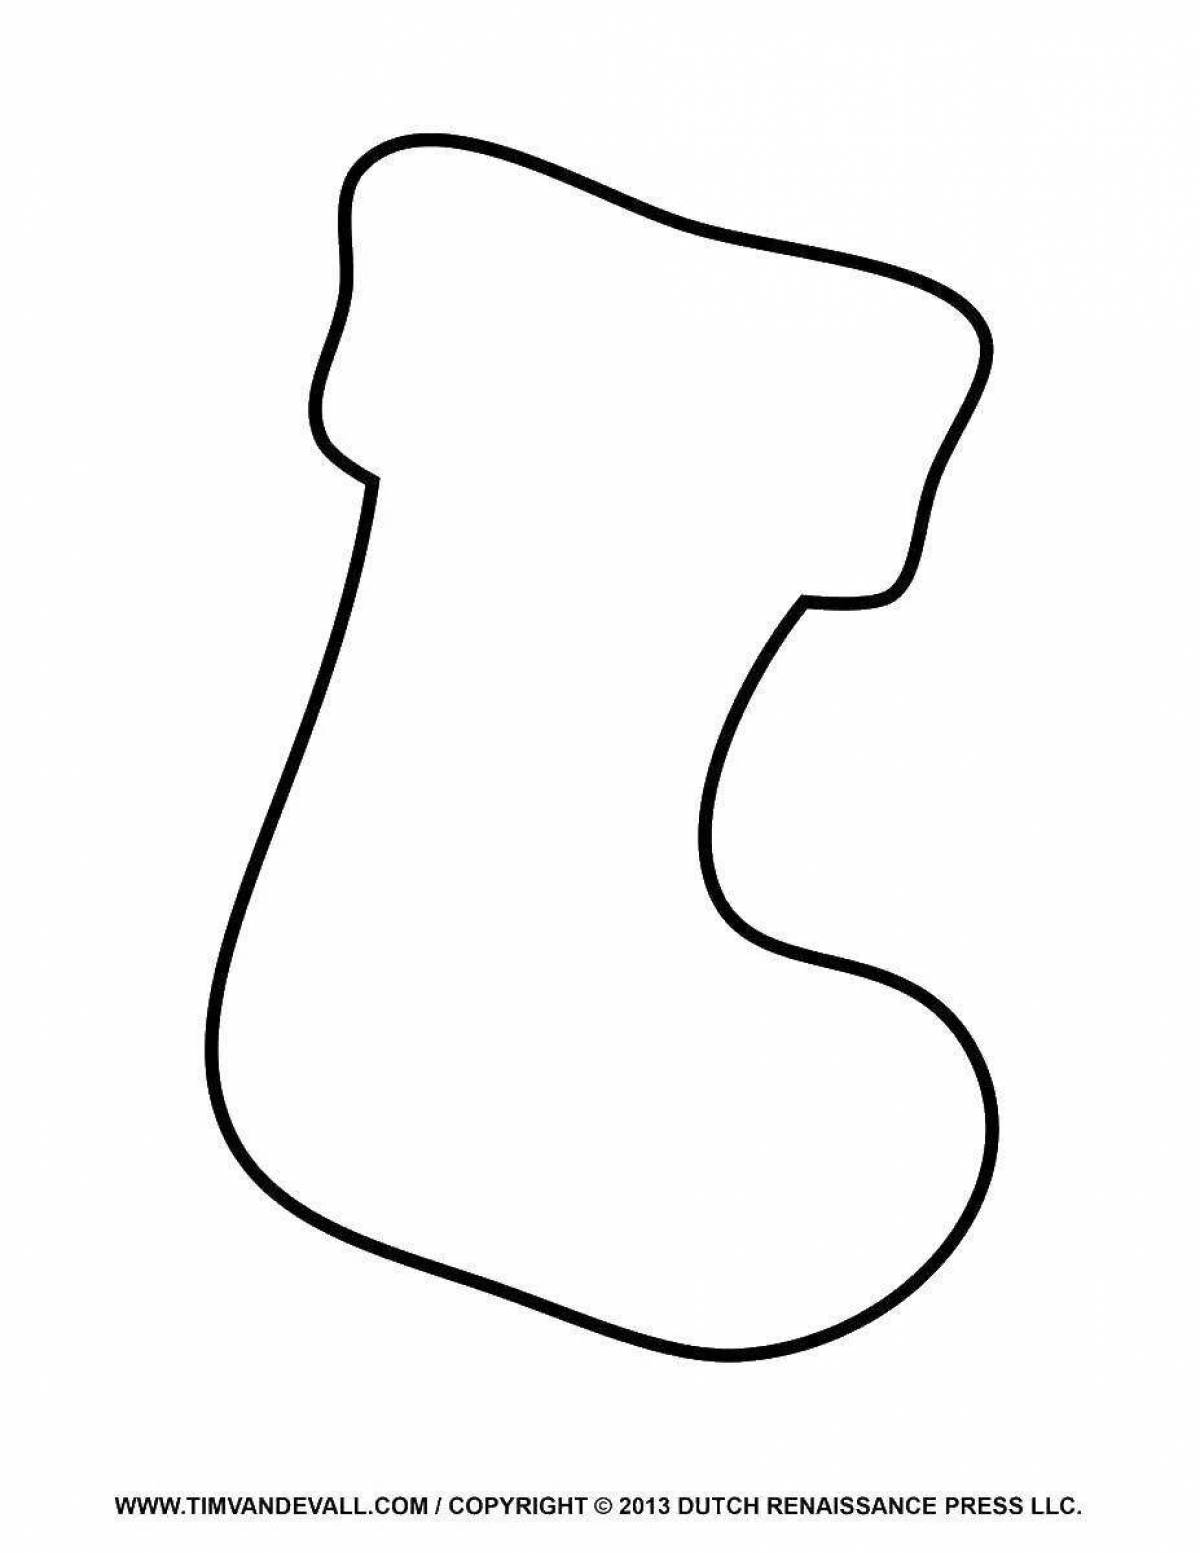 Playful boots pattern coloring page